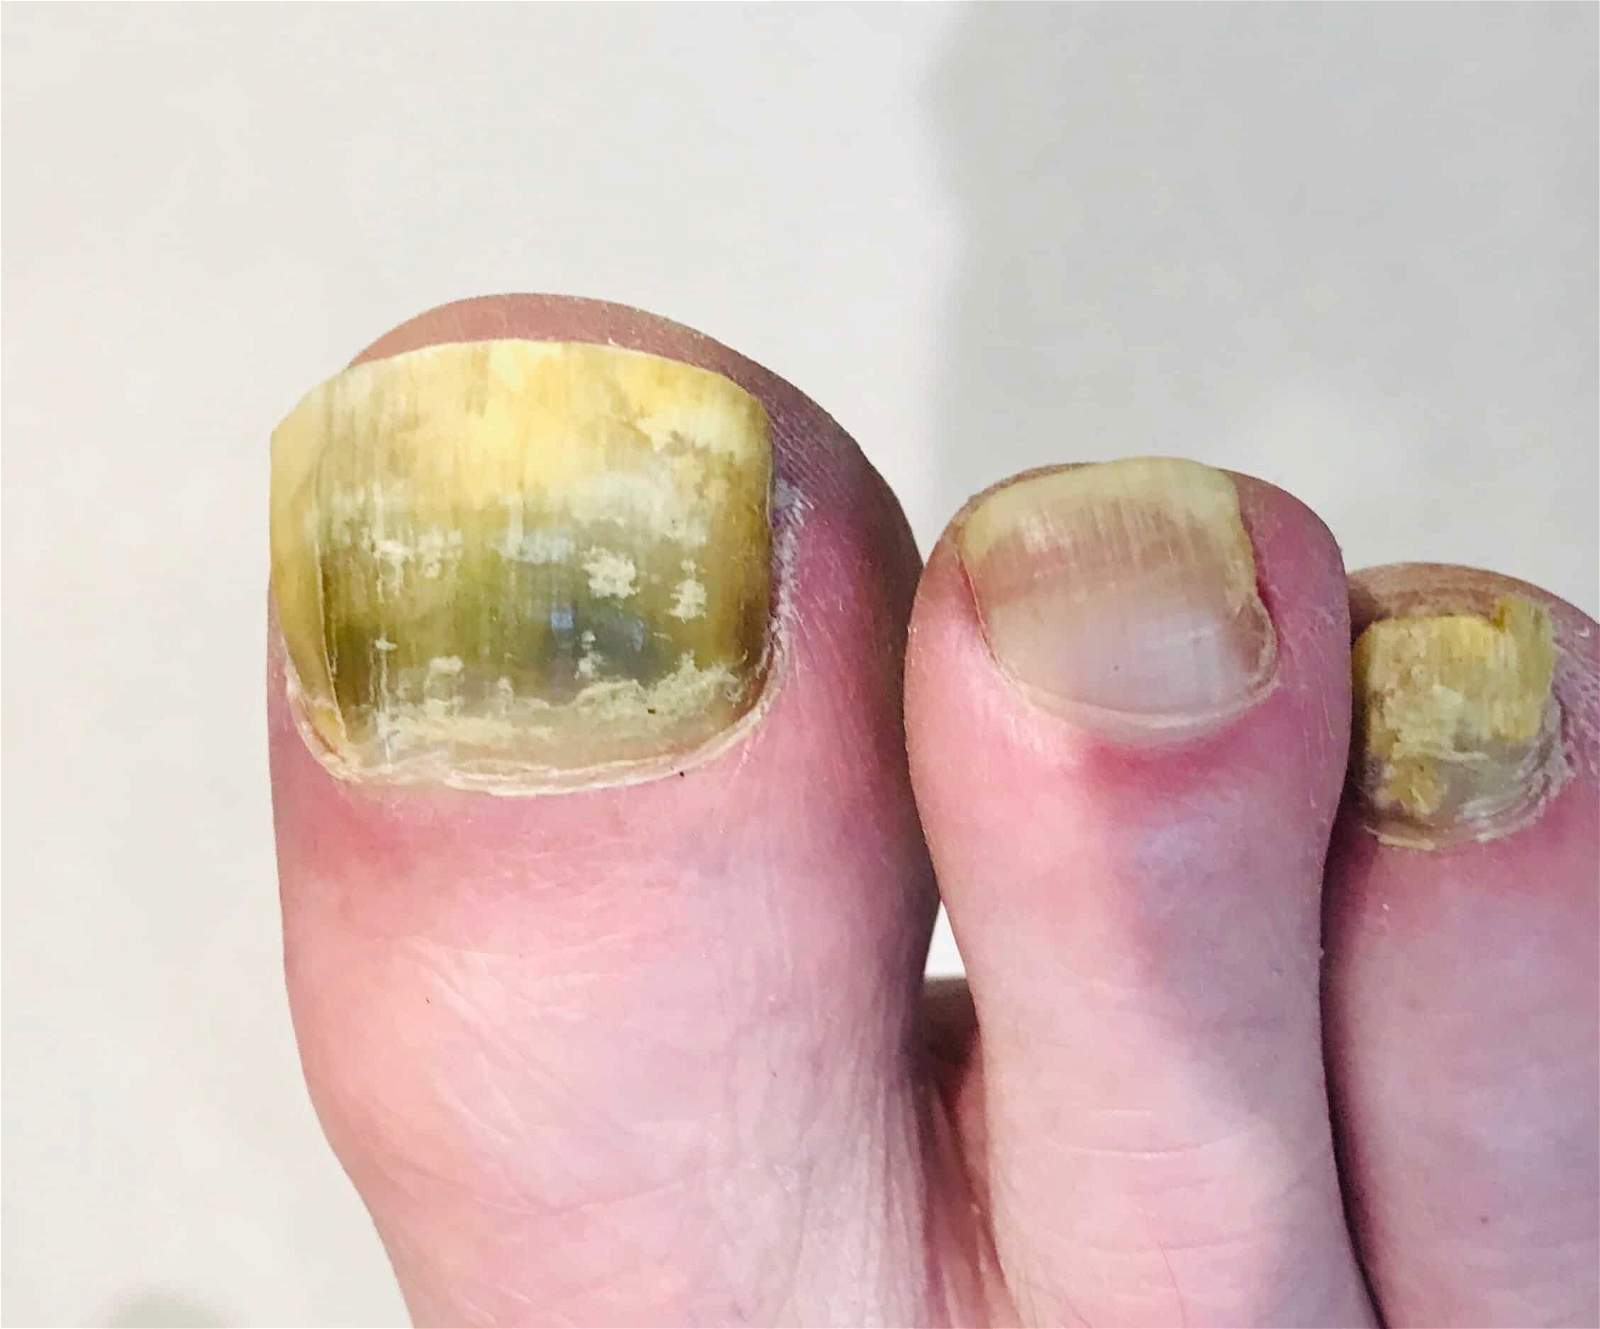 8. Foot Nail Color Changes and Fungal Infections - wide 3